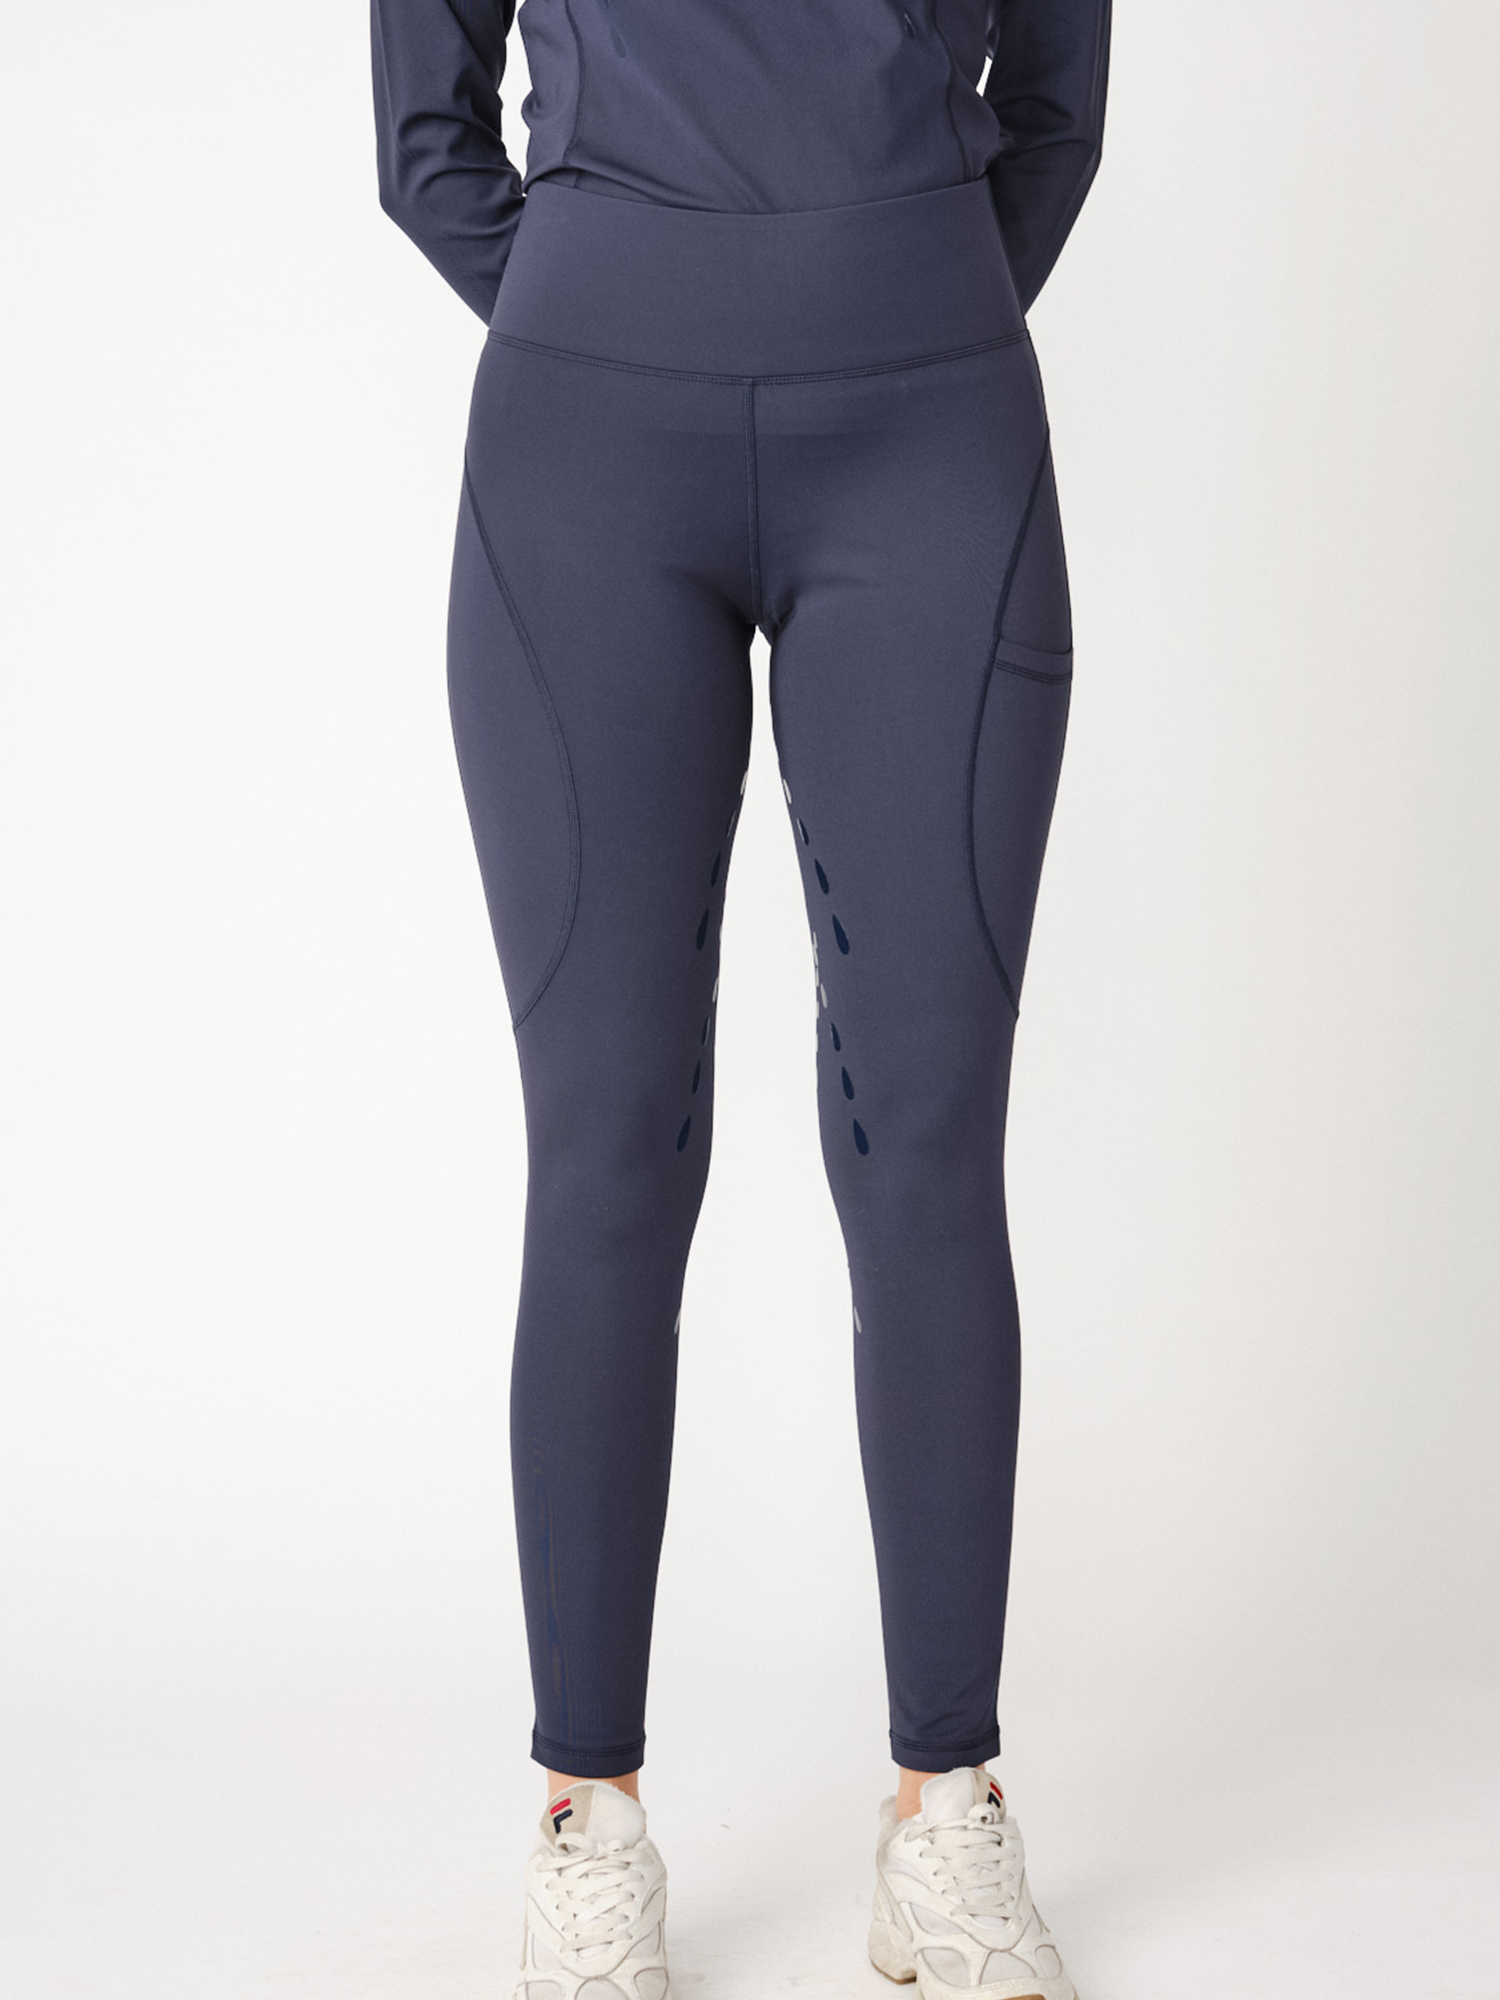 Taylor Riding Tights • PS of Sweden, Hybrid Grip